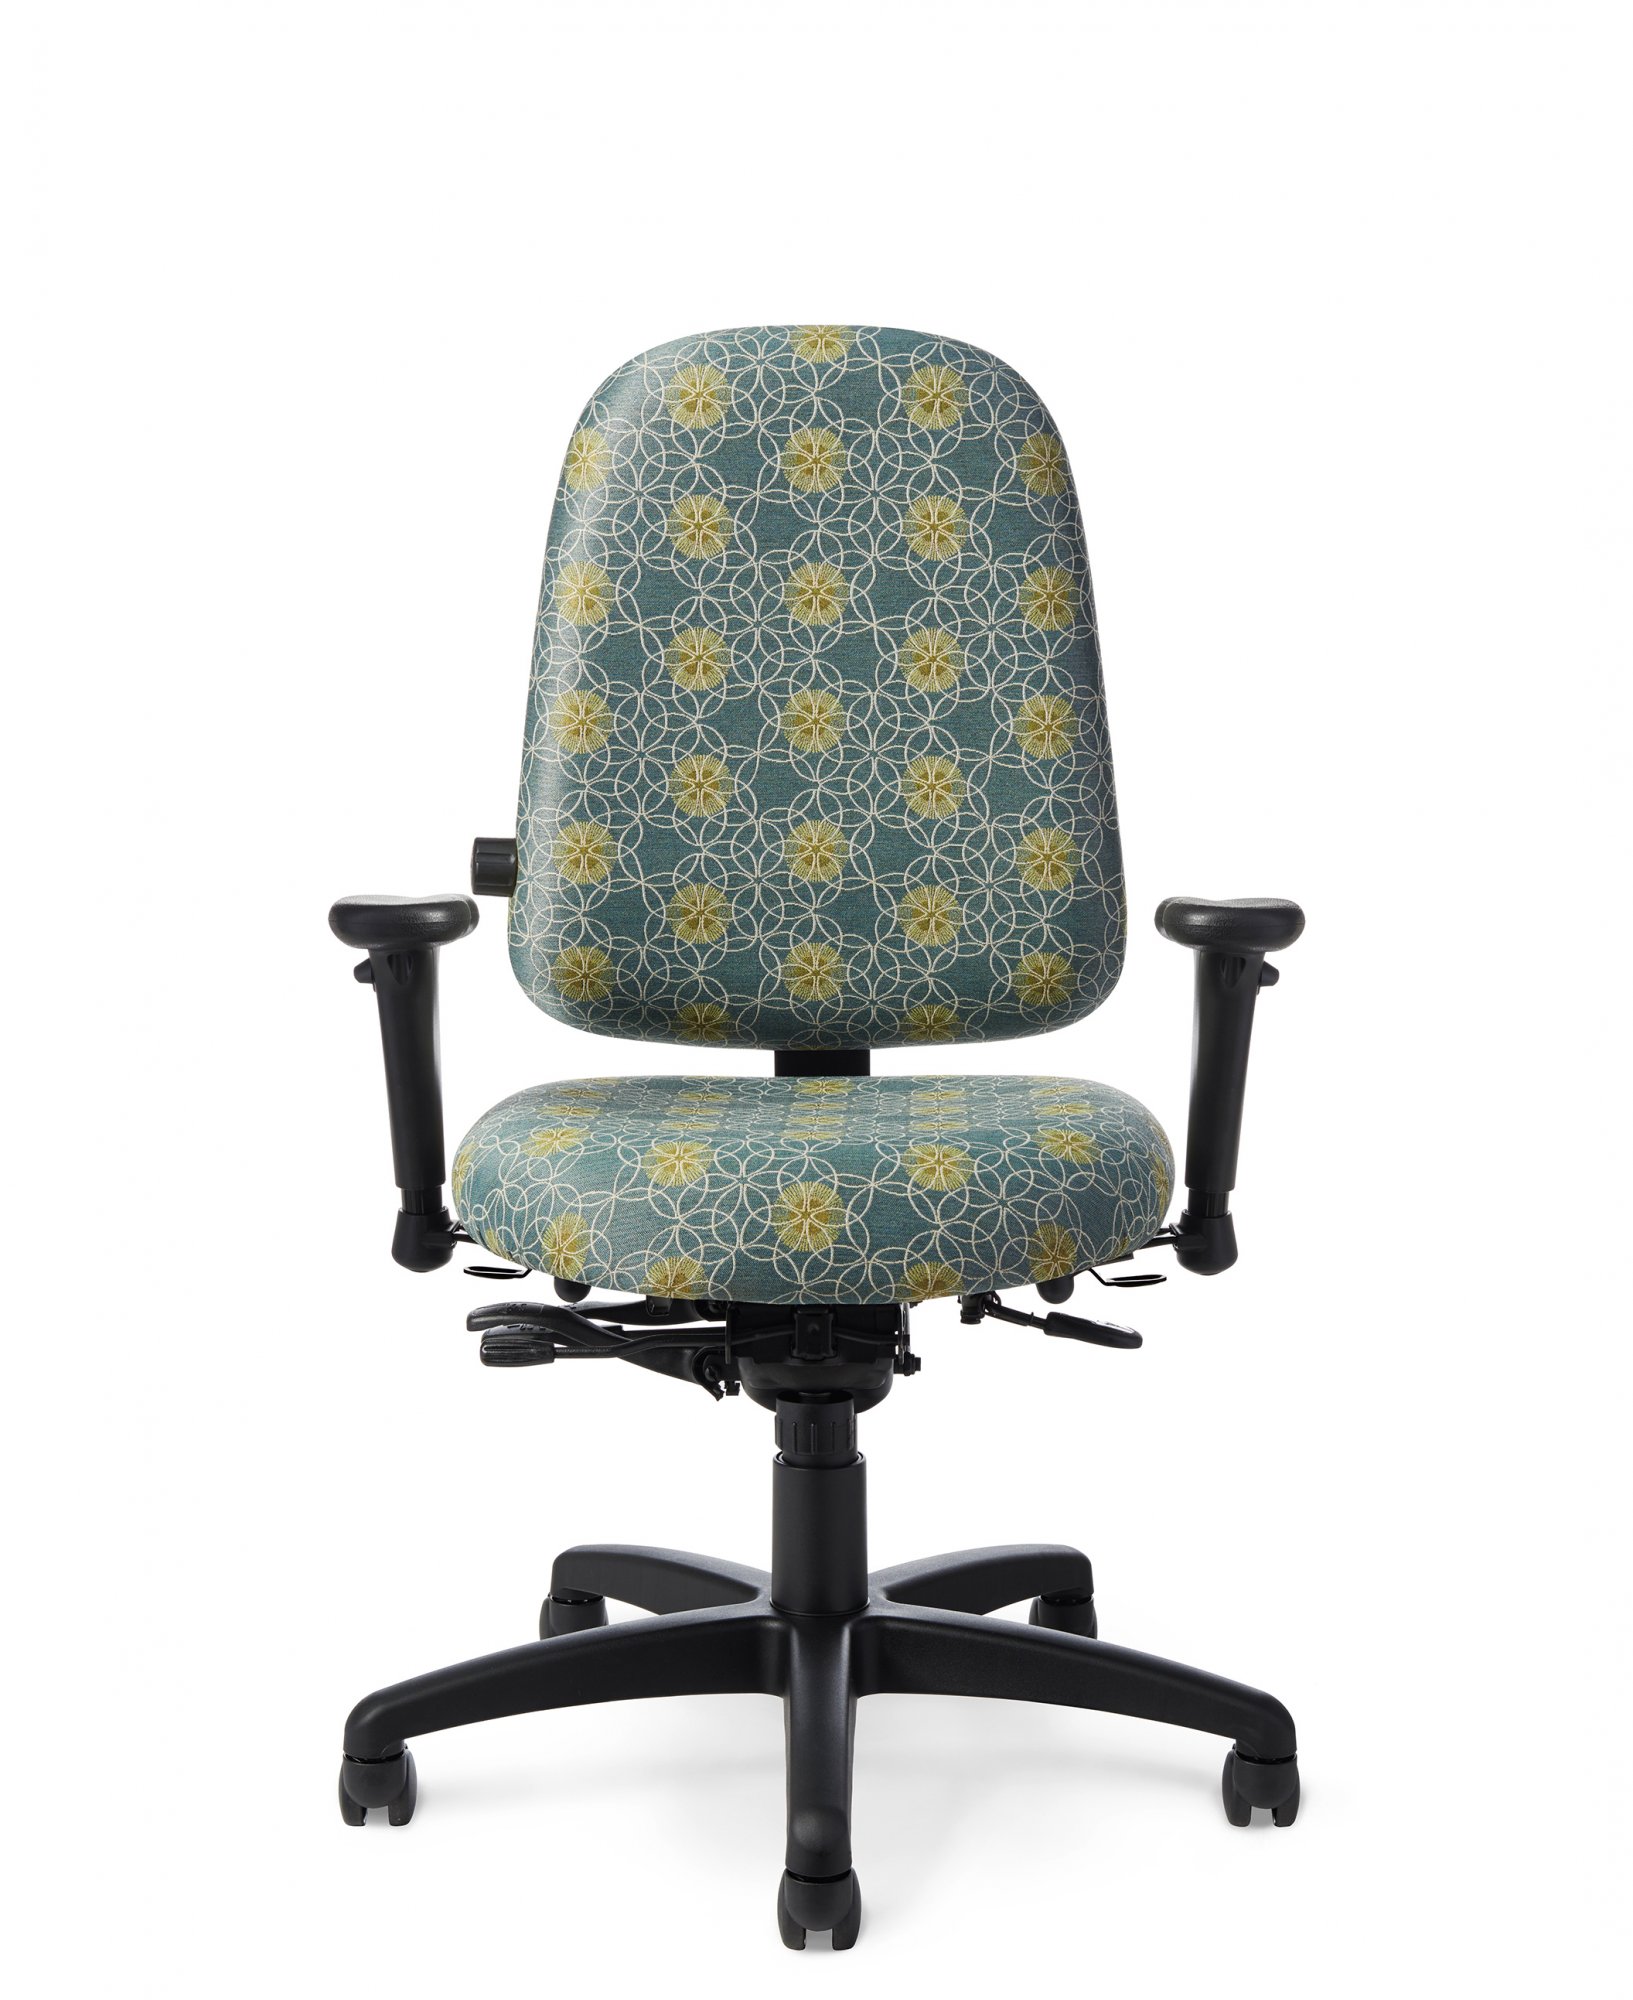 Office Master 7780 Paramount Cross Performance Executive Chair